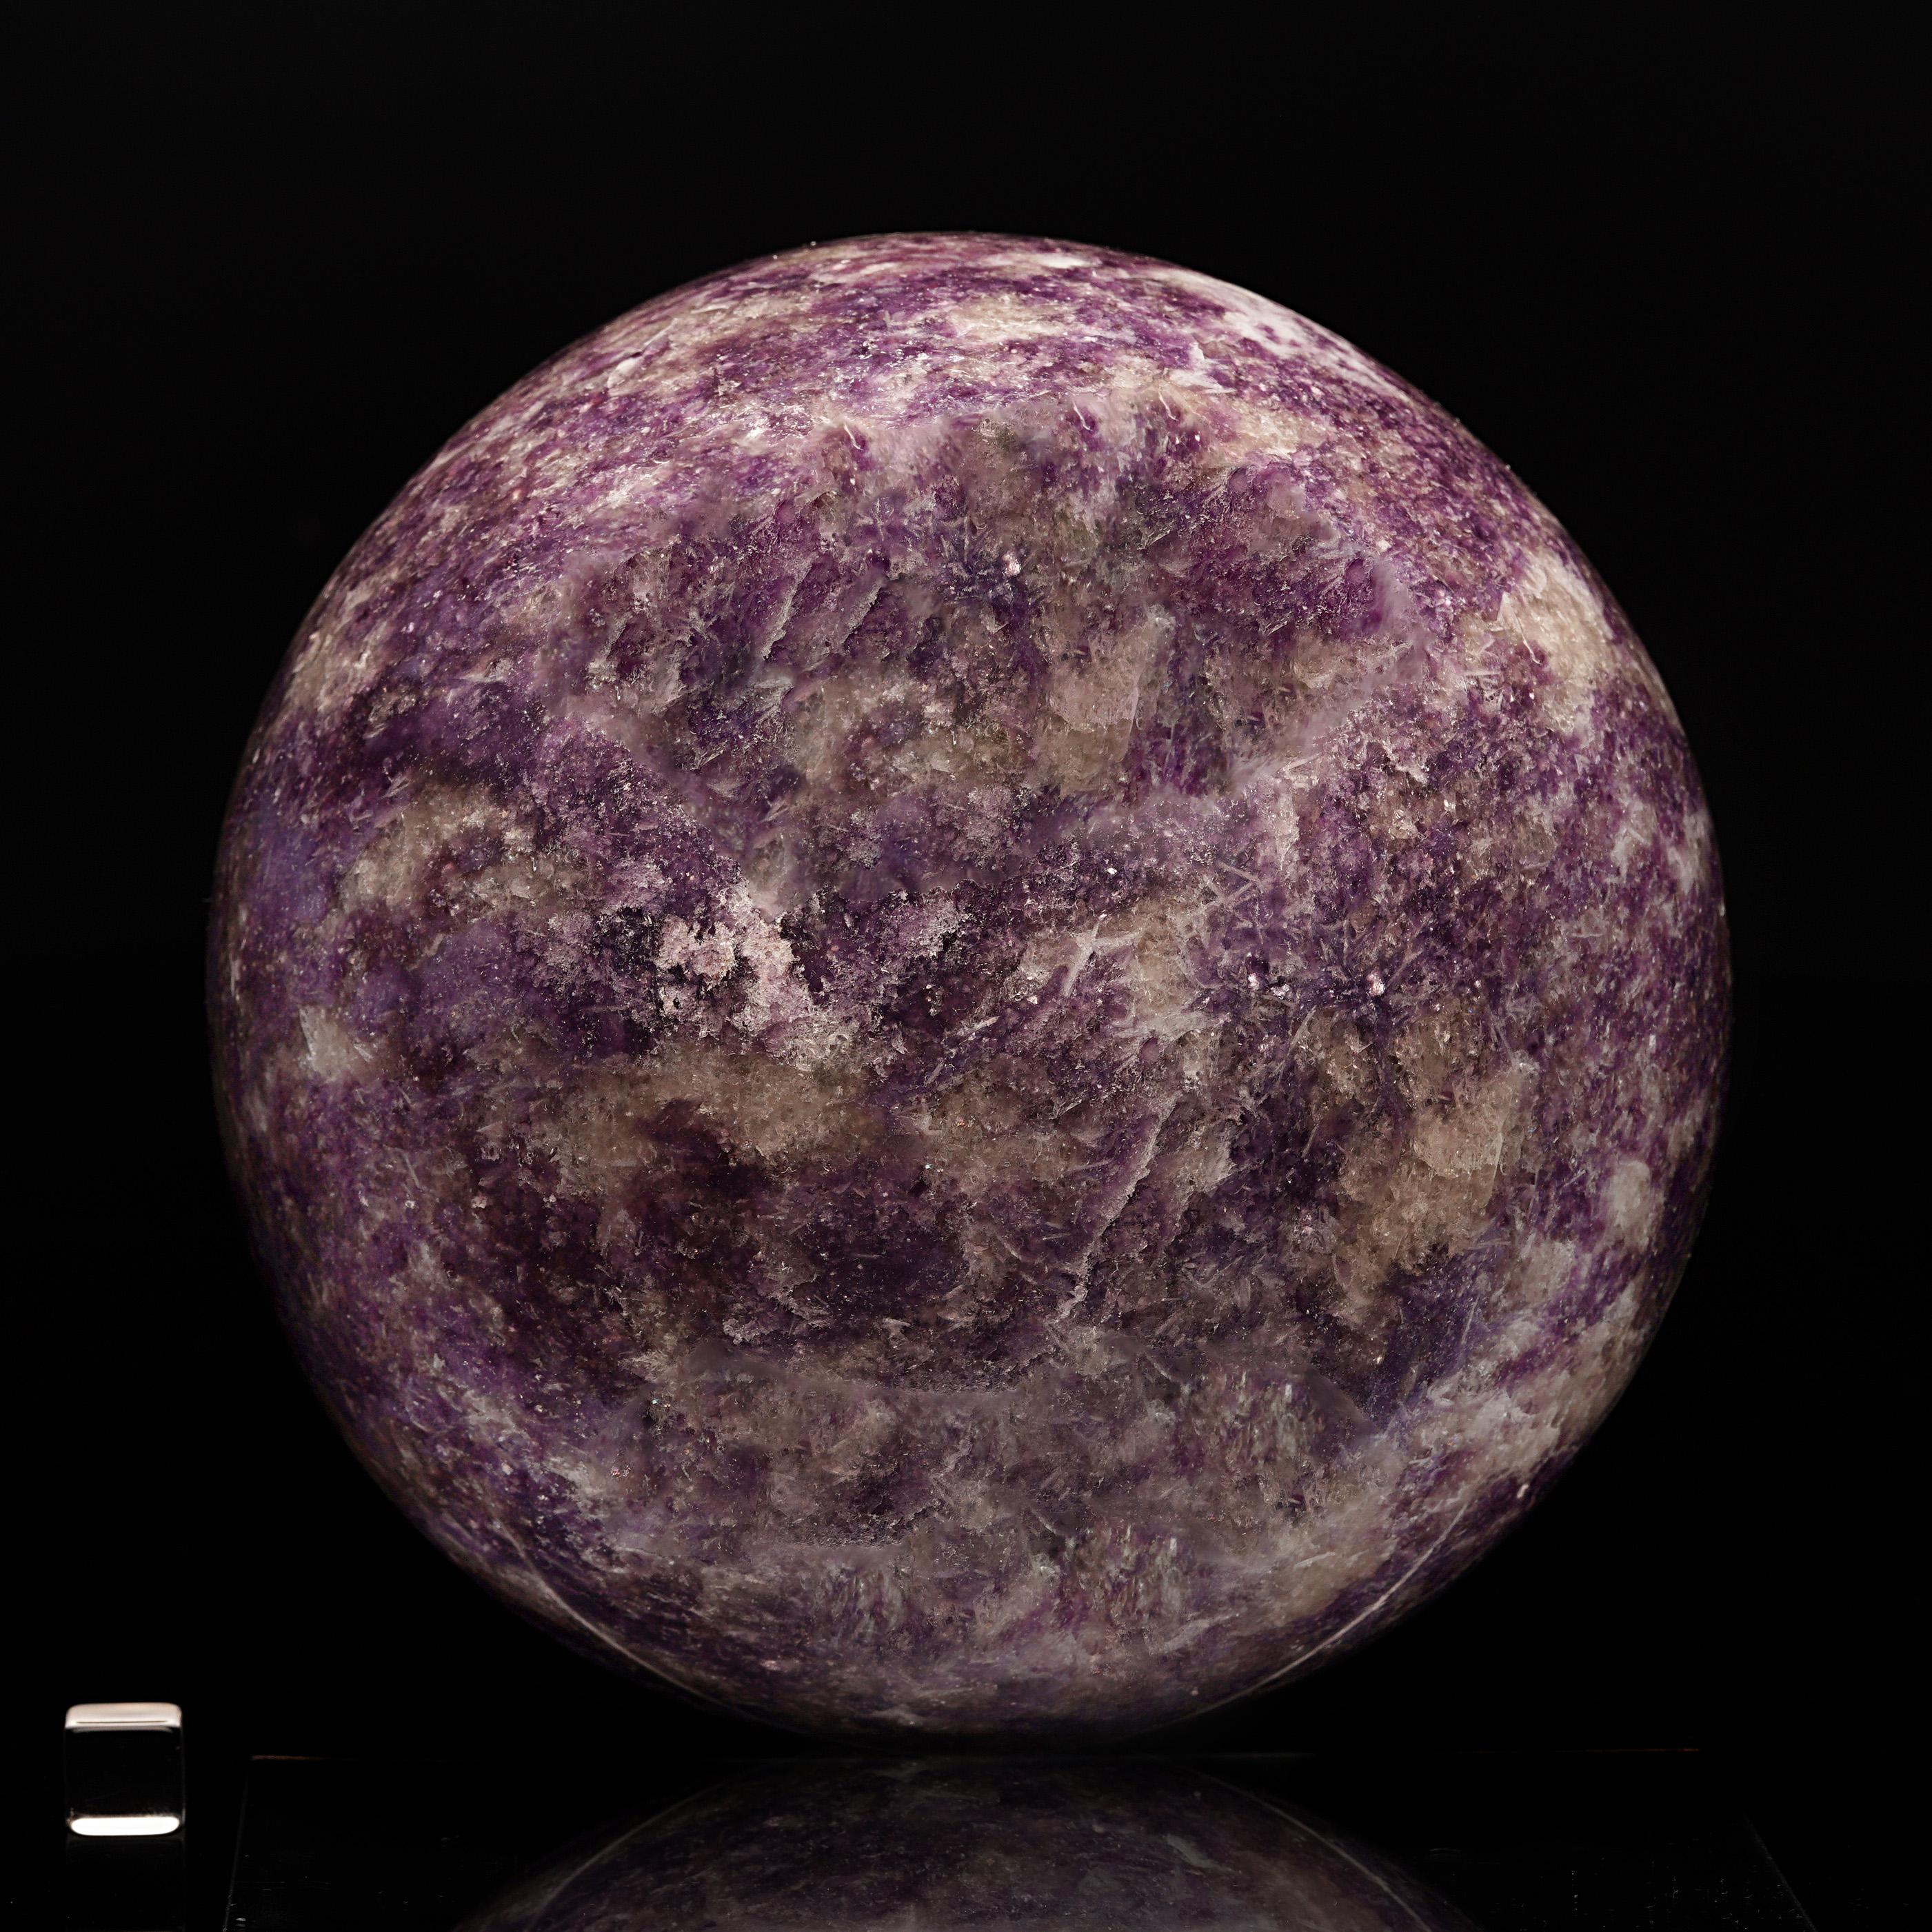 This huge, lustrous sphere has been hand-carved and hand-polished out of excellent color lepidolite. Lepidolite is a pink to purple, lithium-rich variety of mica and its lush color comes from traces of manganese. This dynamic piece will make a